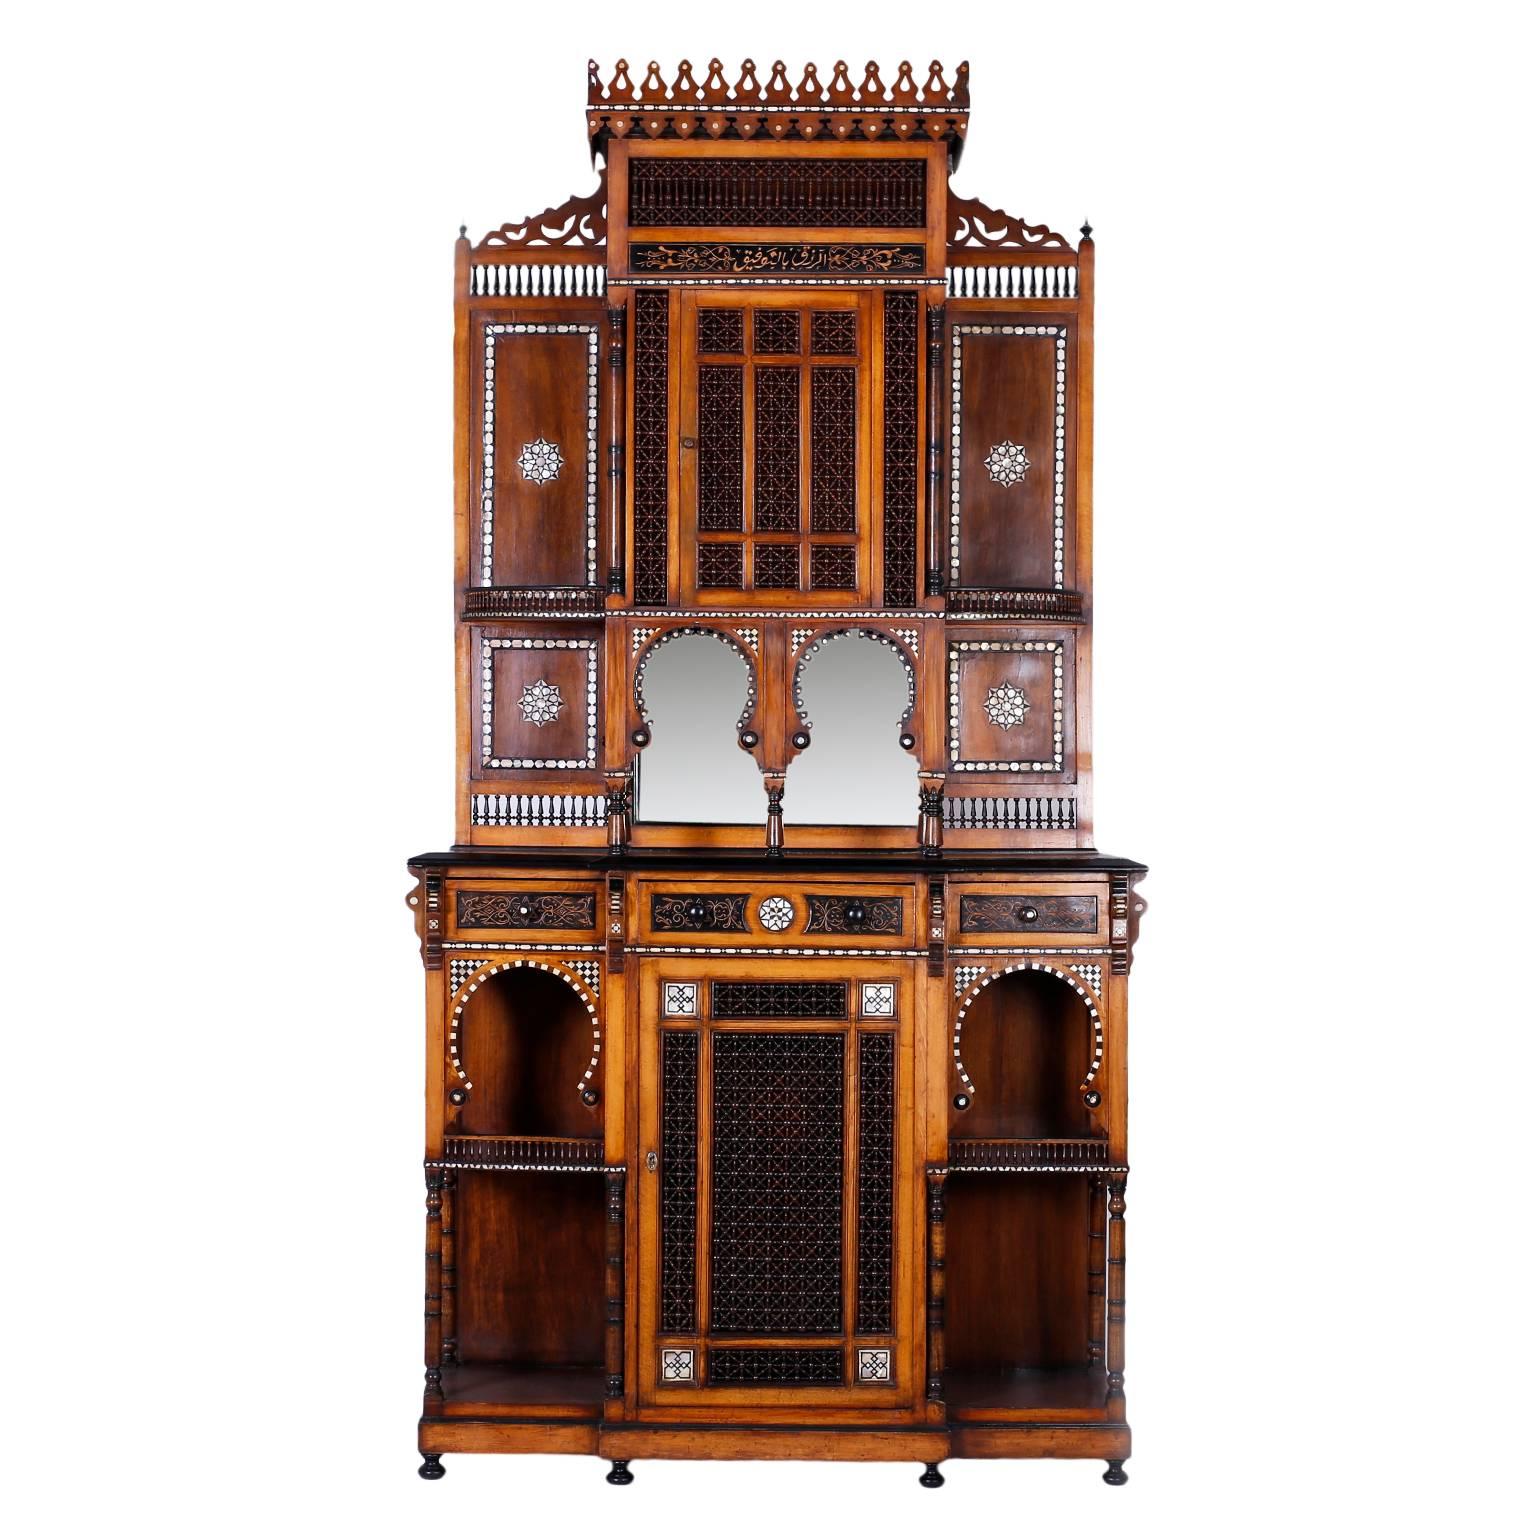 Large and impressive antique walnut Syrian cabinet, server or bar commanding architectural form. Featuring a turret gallery at the top, ebony highlights throughout, stick and ball panels, mirrored backplate, mother-of-pearl and bone inlays with